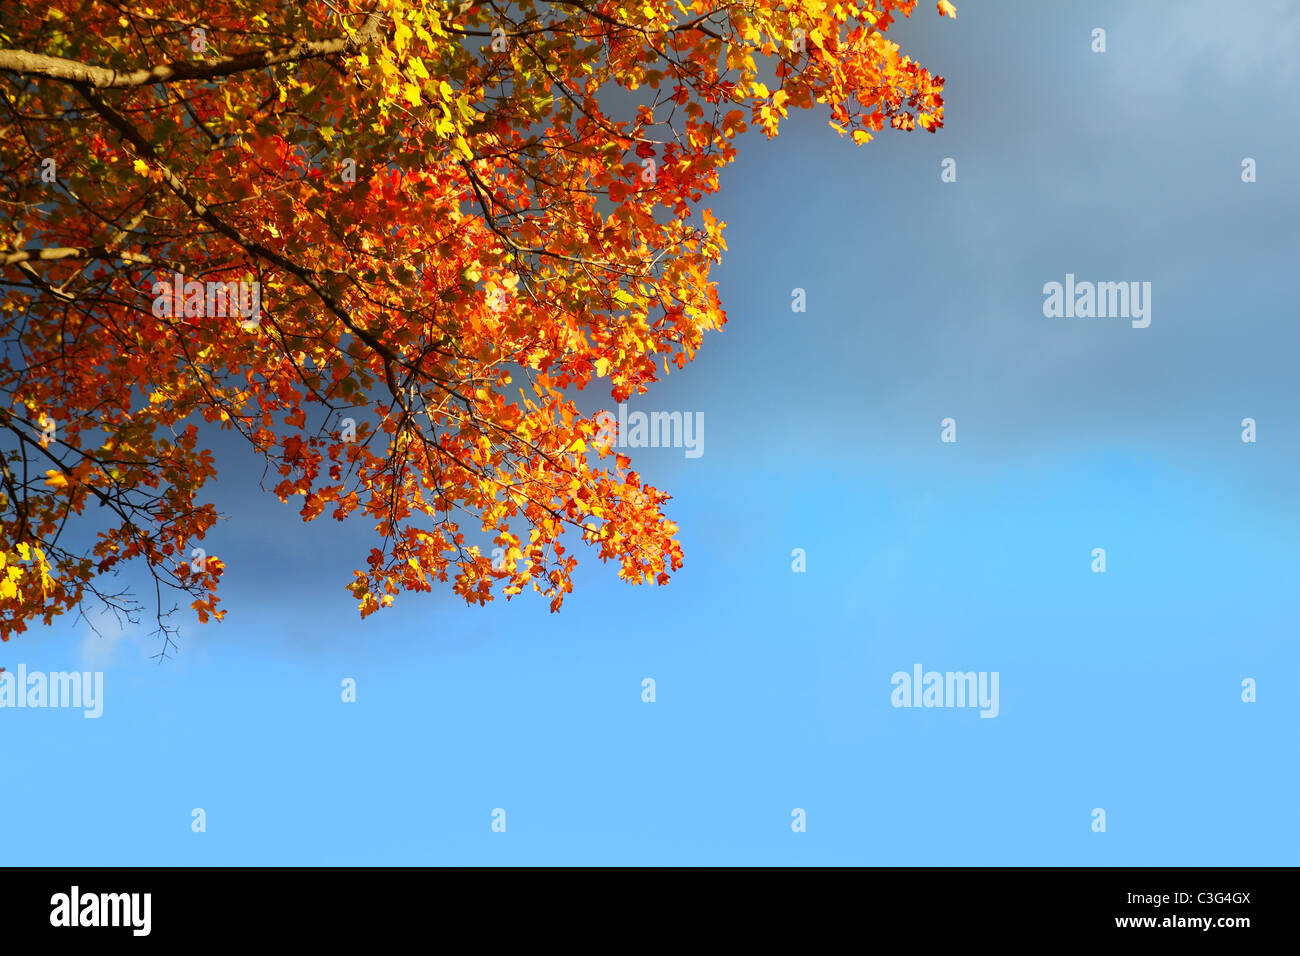 autumn fall golden beech tree leaves stormy cloud blue sky Stock Photo